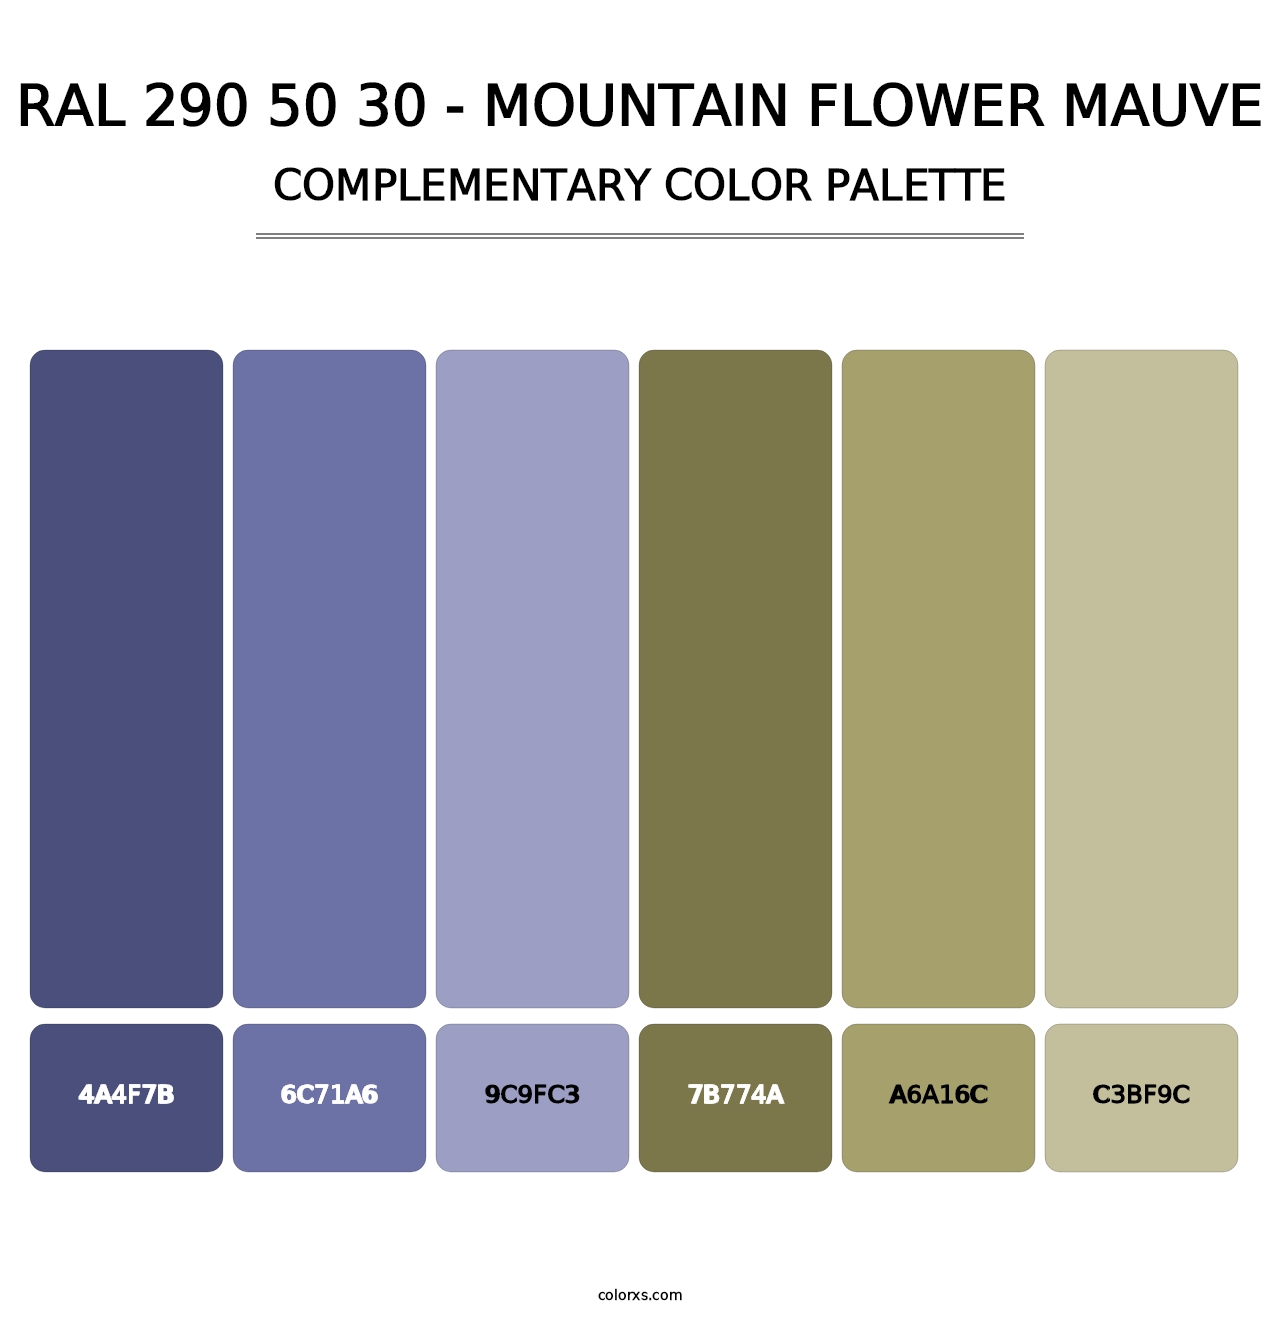 RAL 290 50 30 - Mountain Flower Mauve - Complementary Color Palette